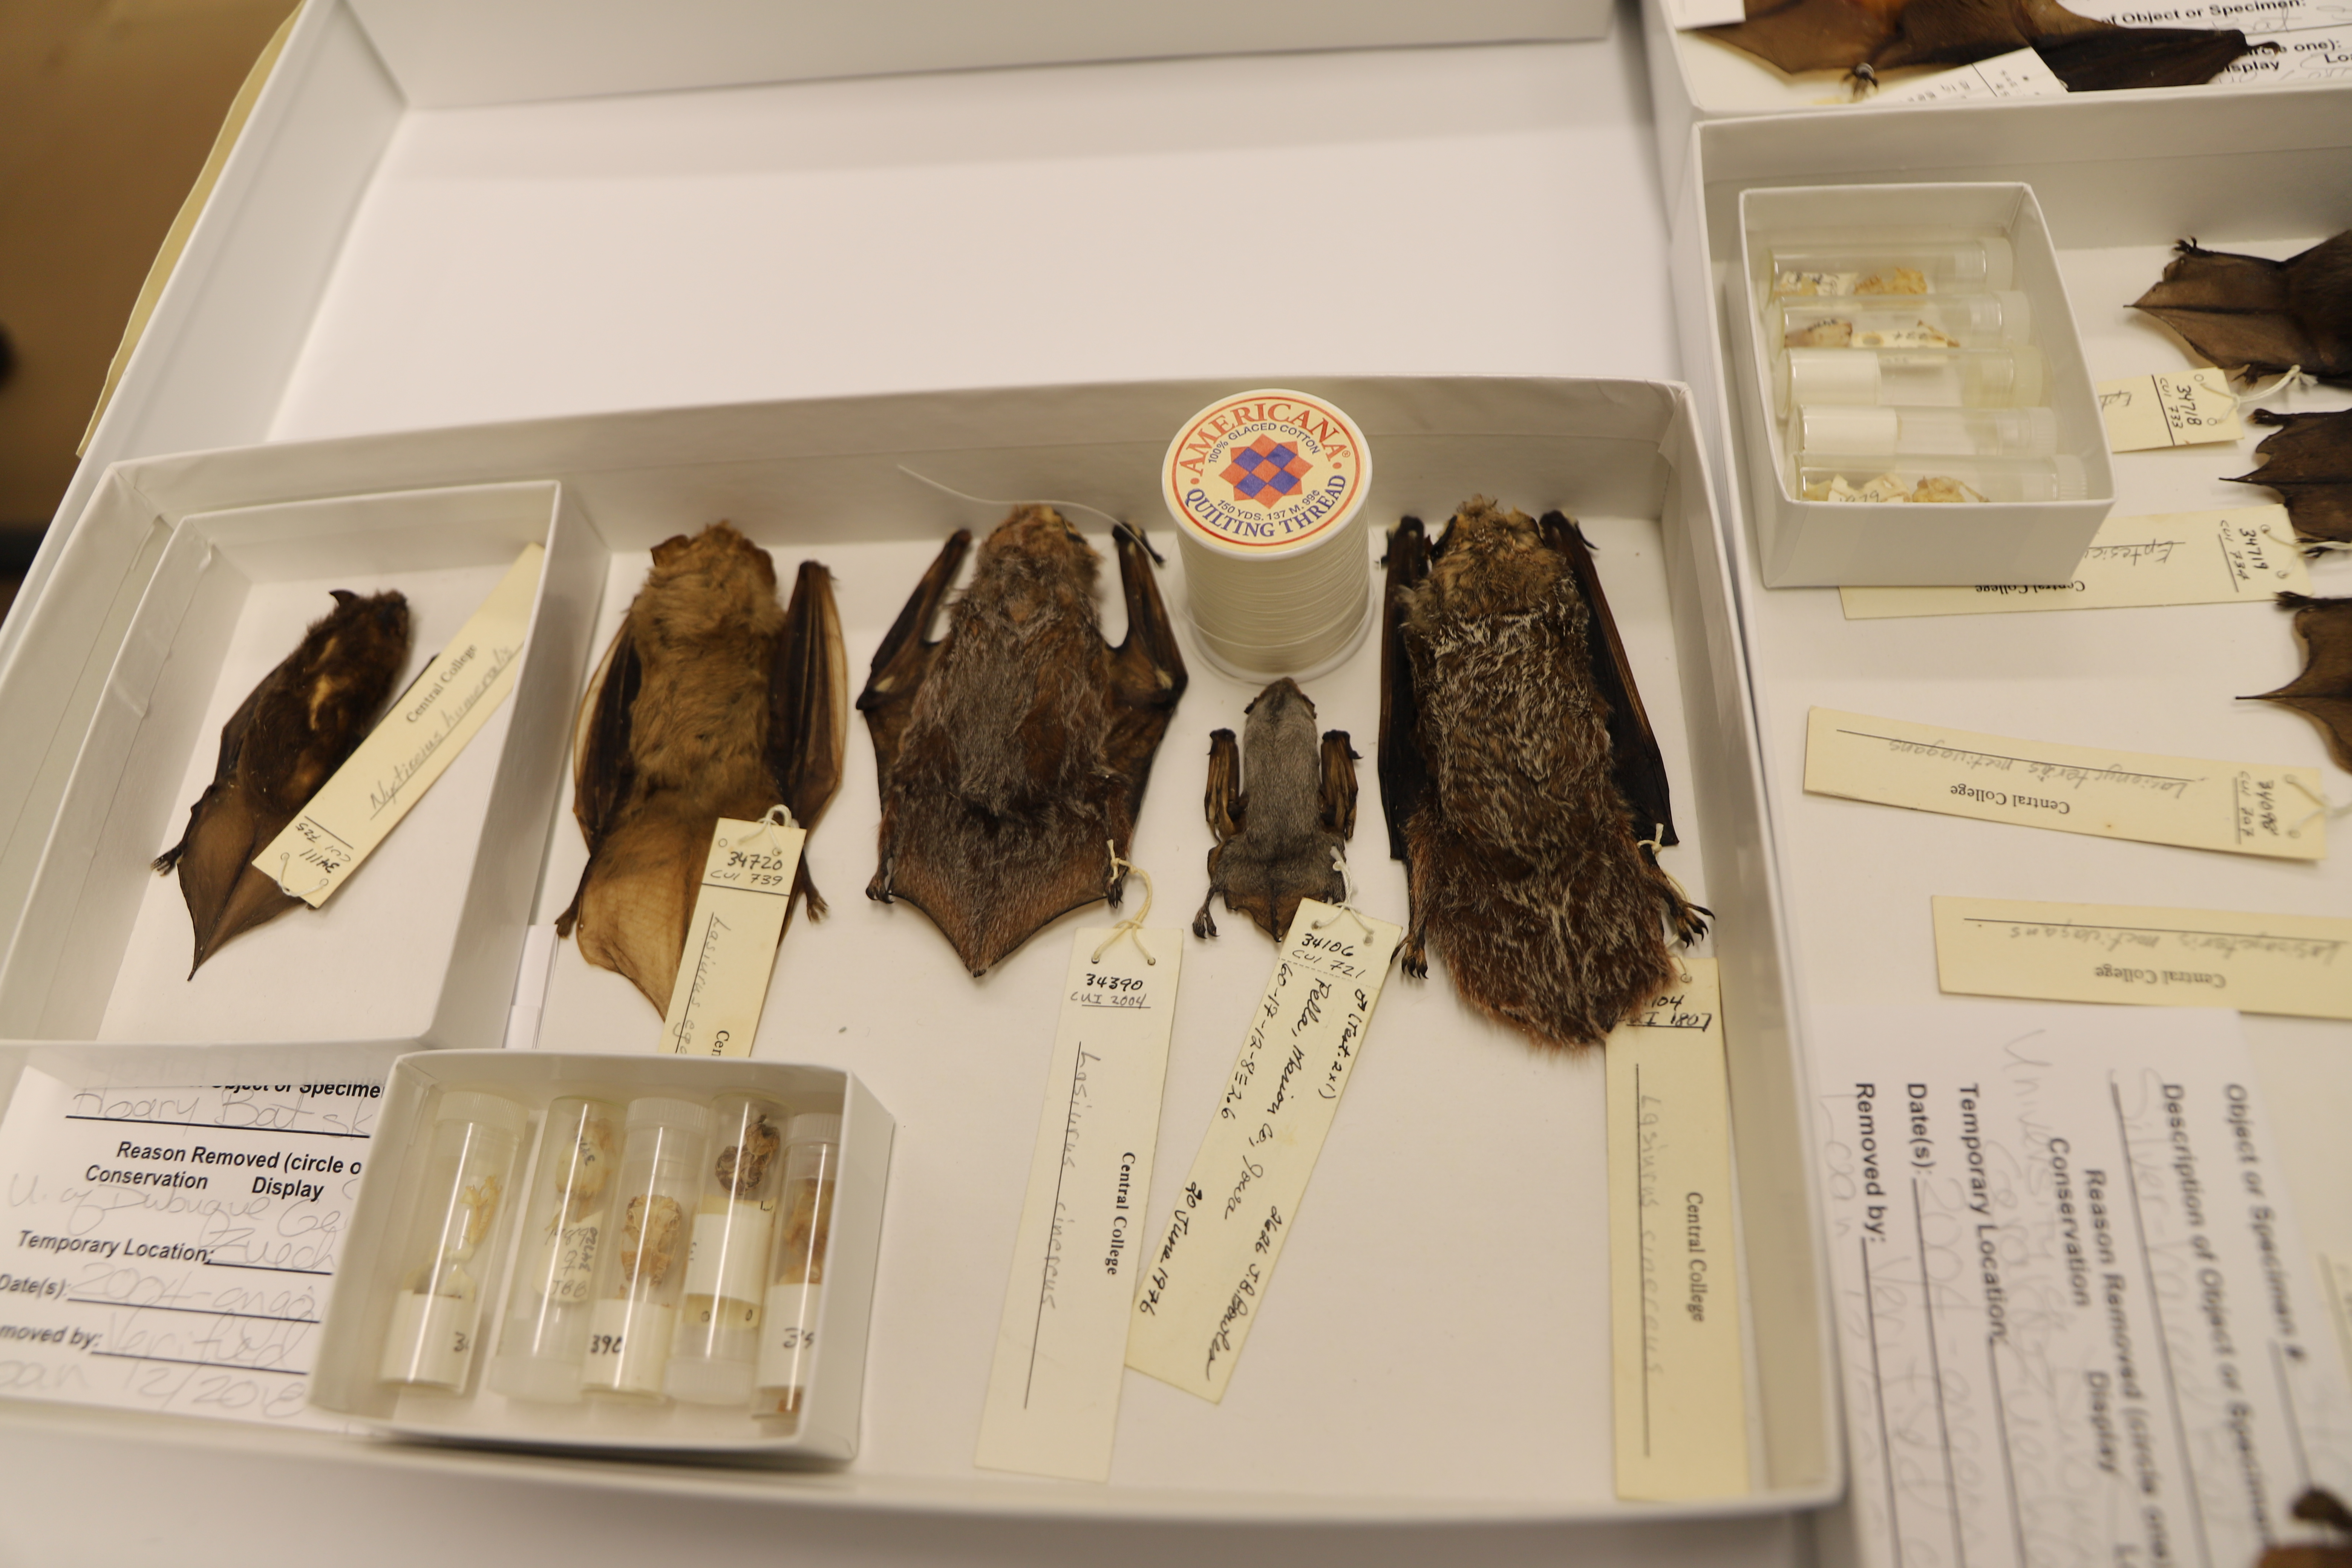 Smallest bat in UIMNH collections, obtained in June of 1976